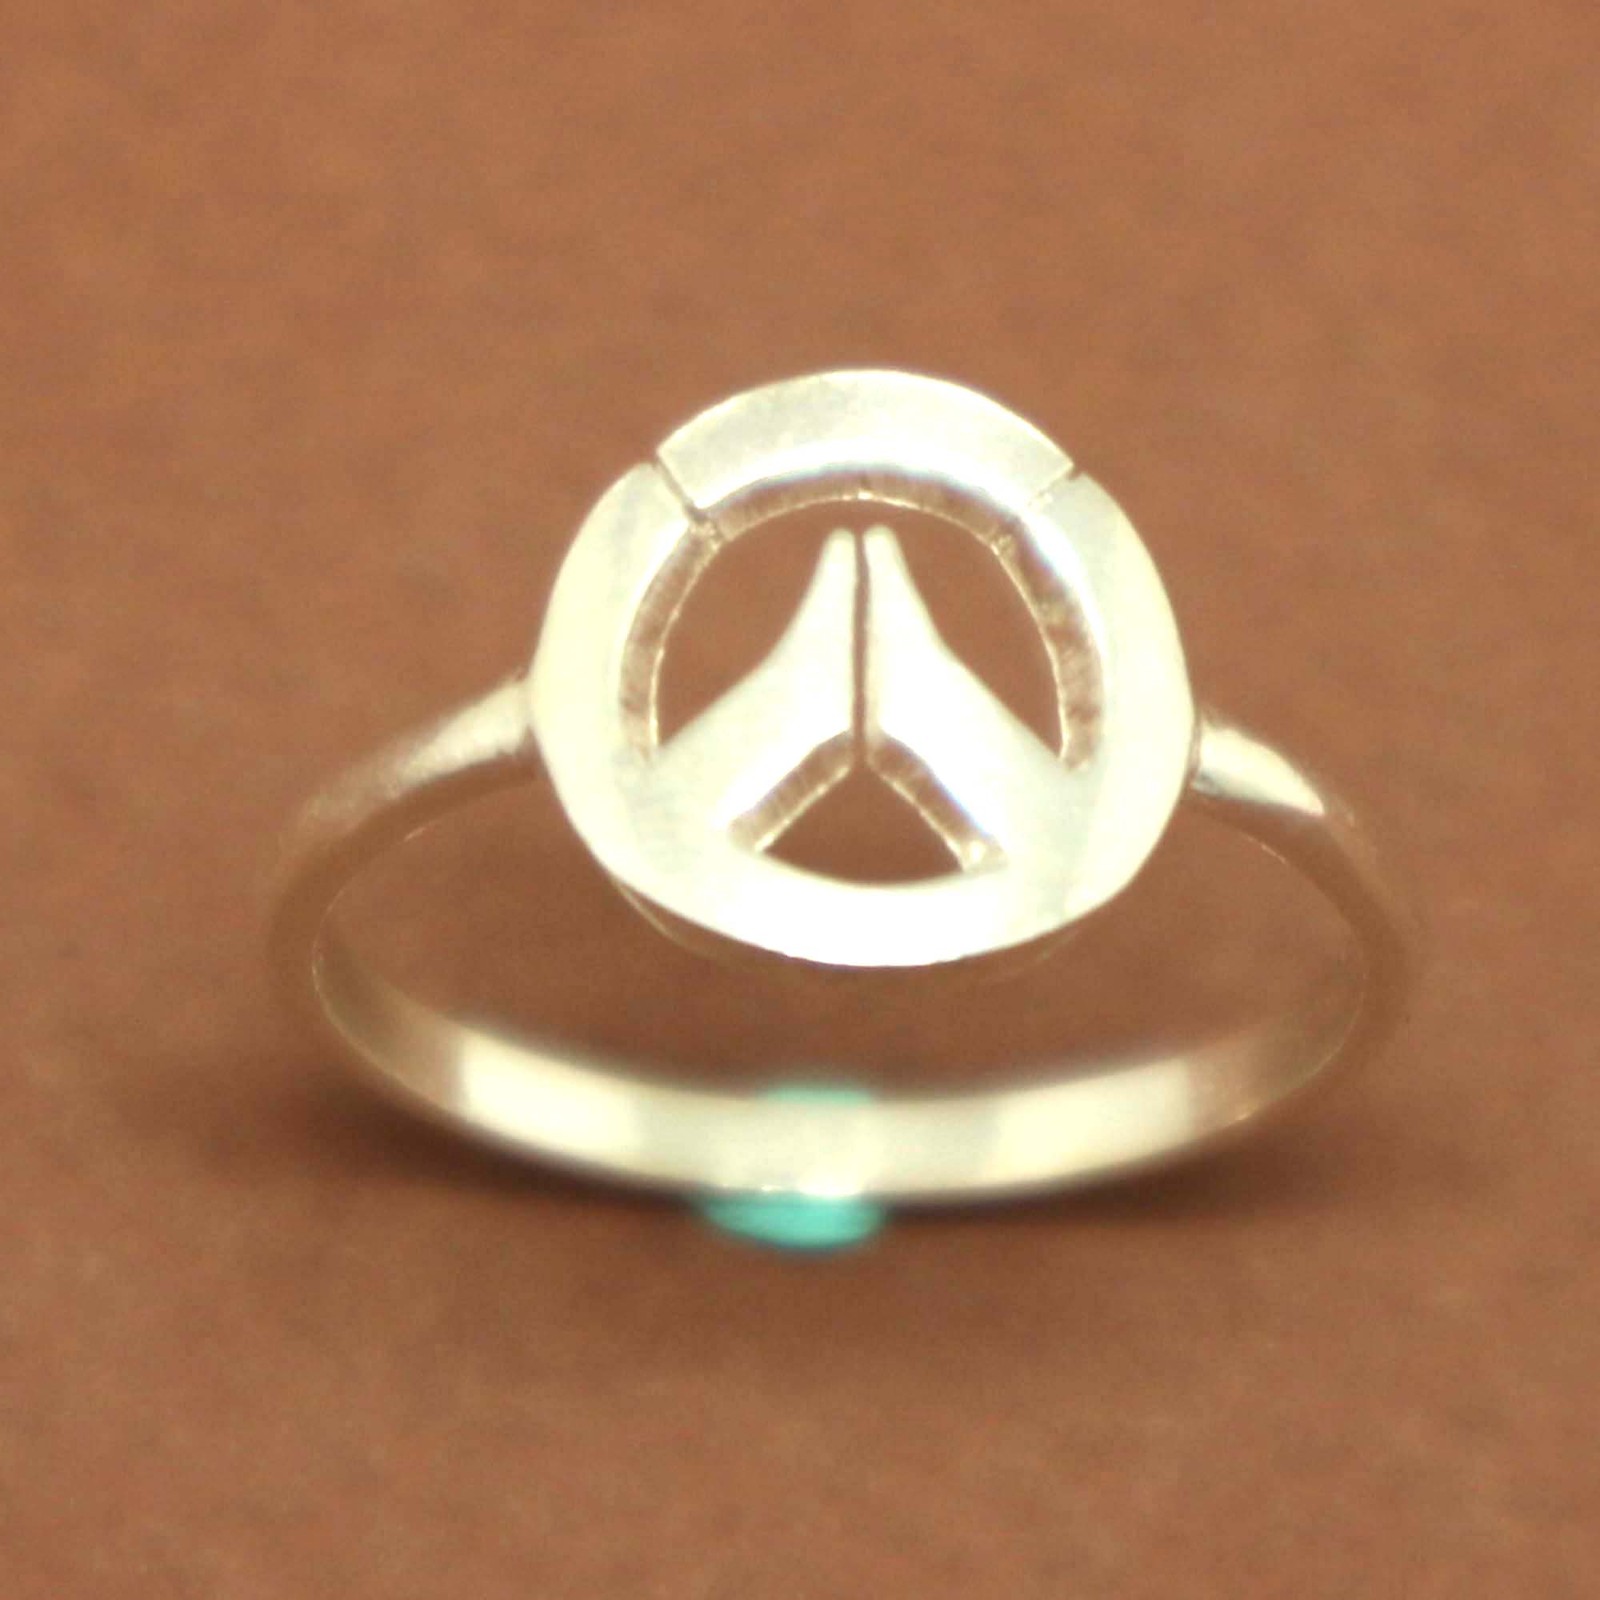 Handmade 925 Sterling Silver Overwatch New badge Ring for Geek PC Video Gamer